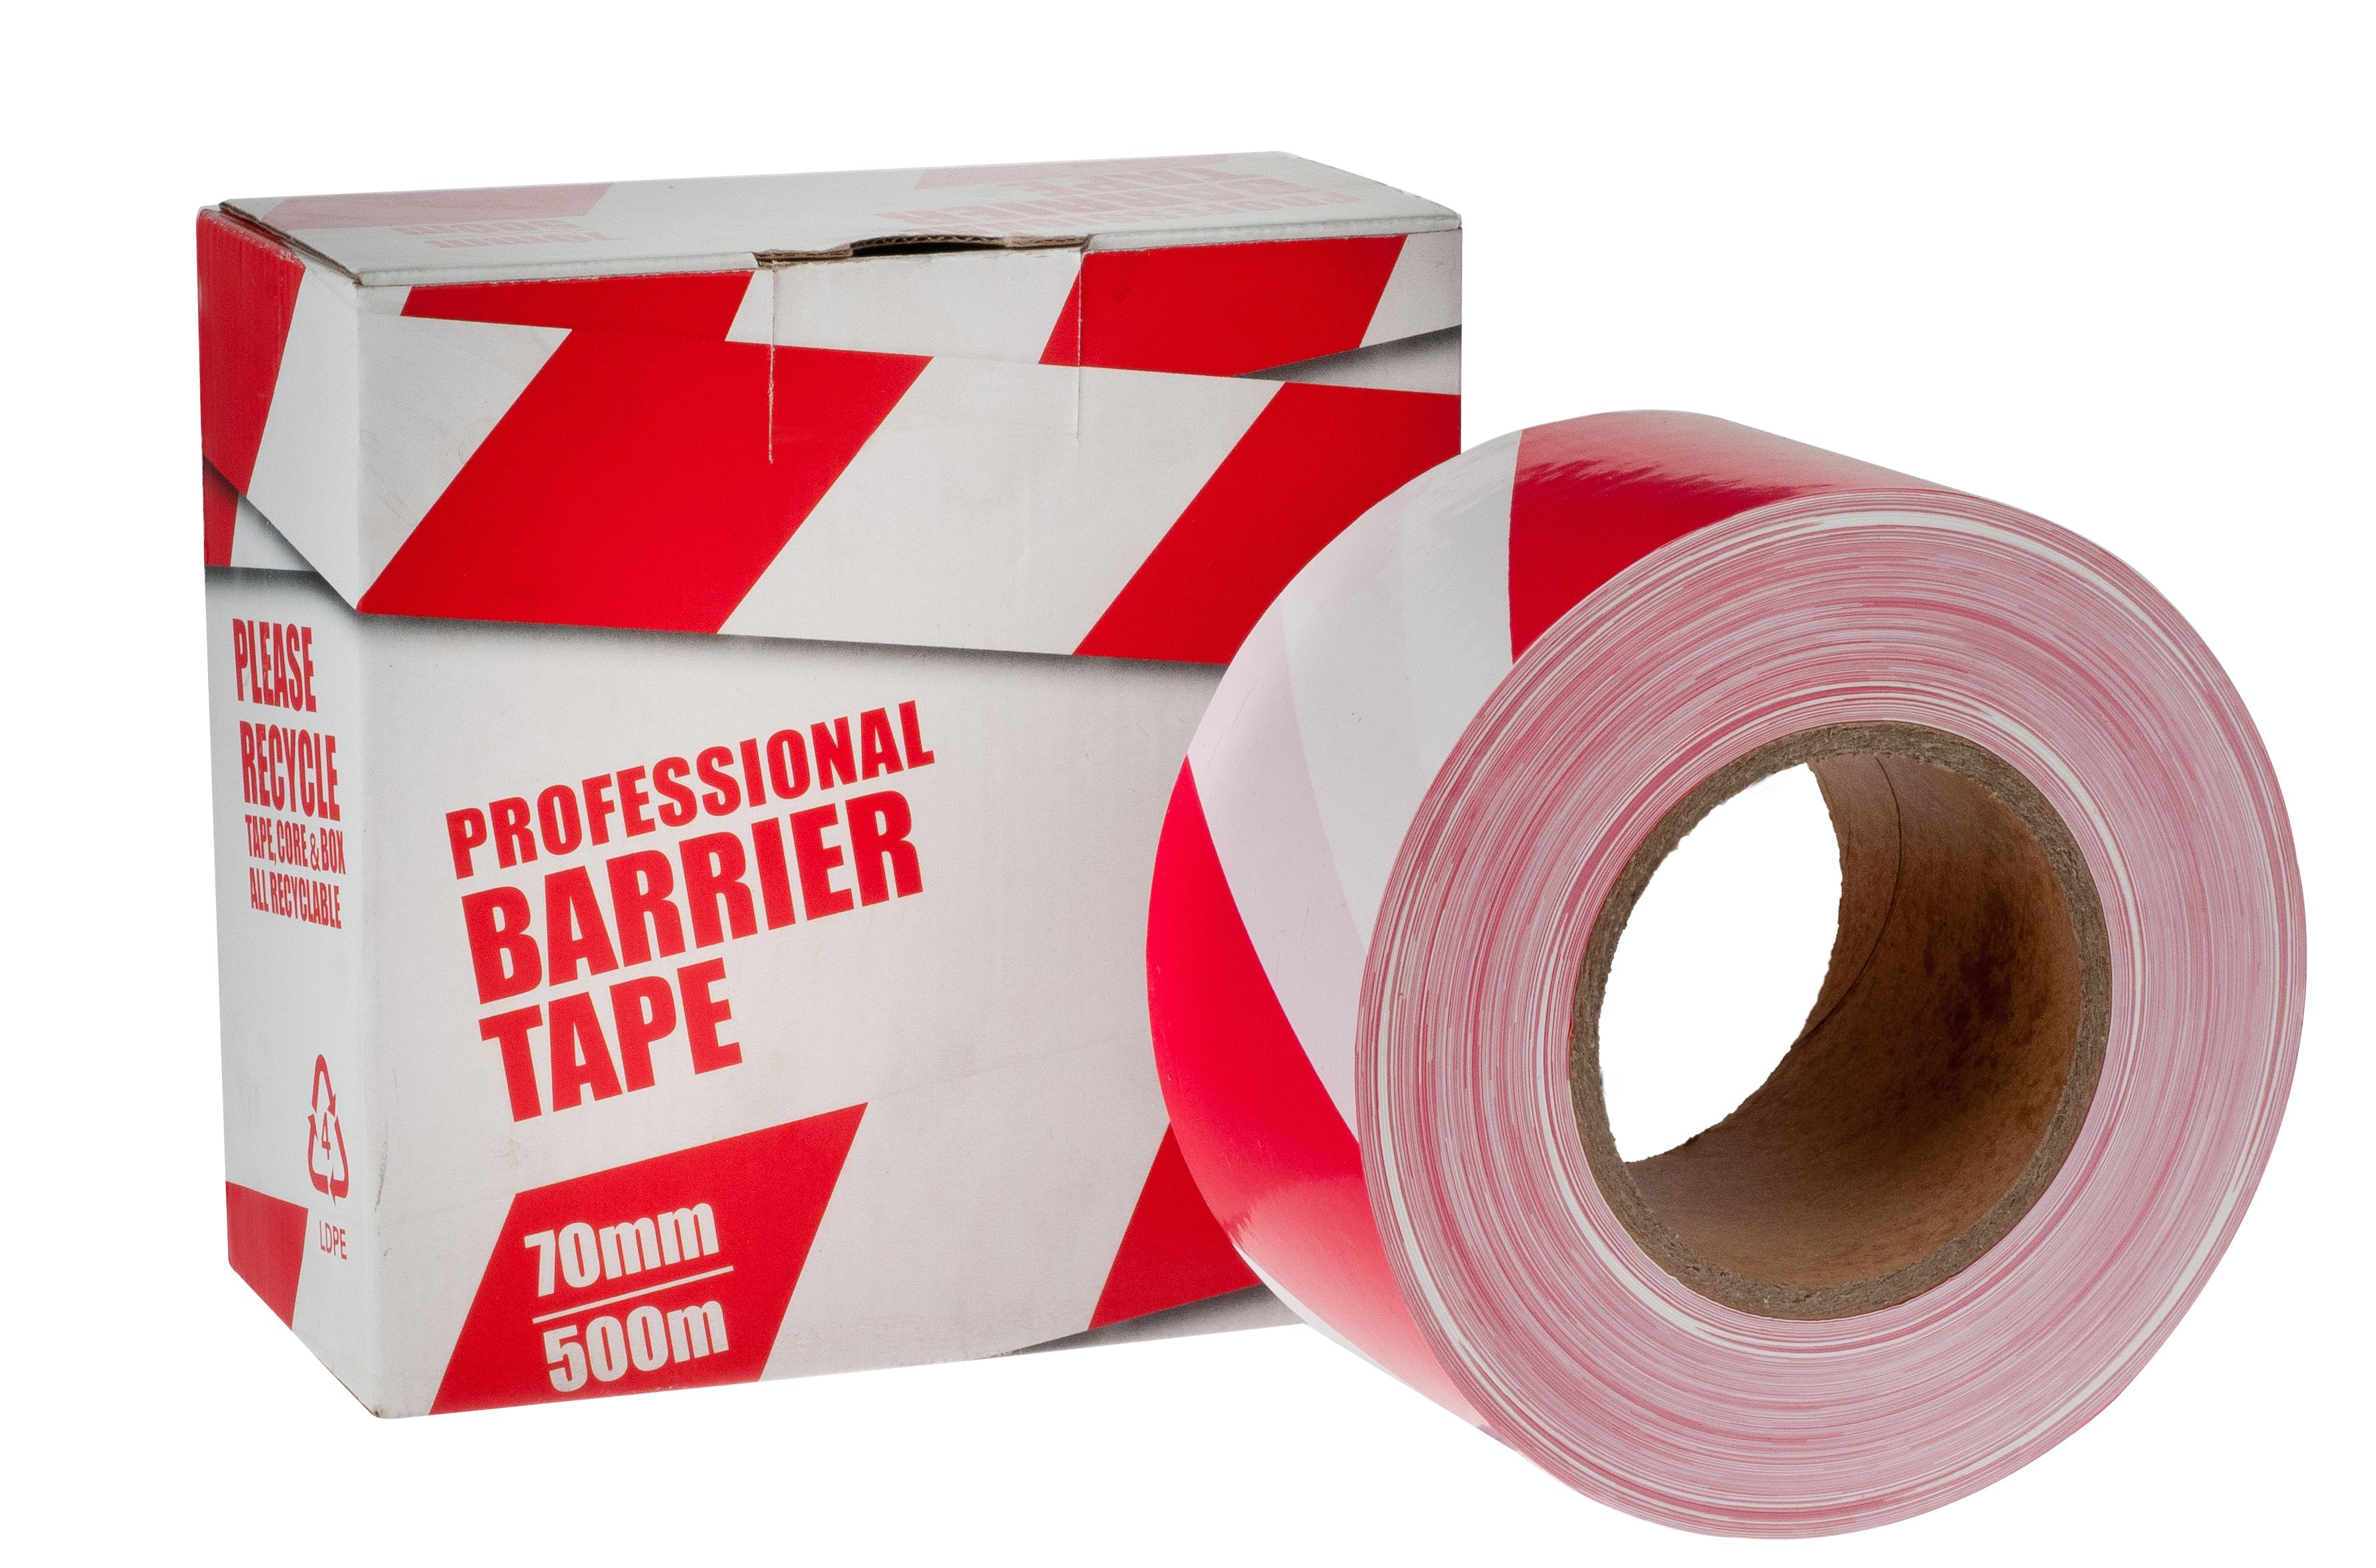 PROFESSIONAL BARRIER TAPE